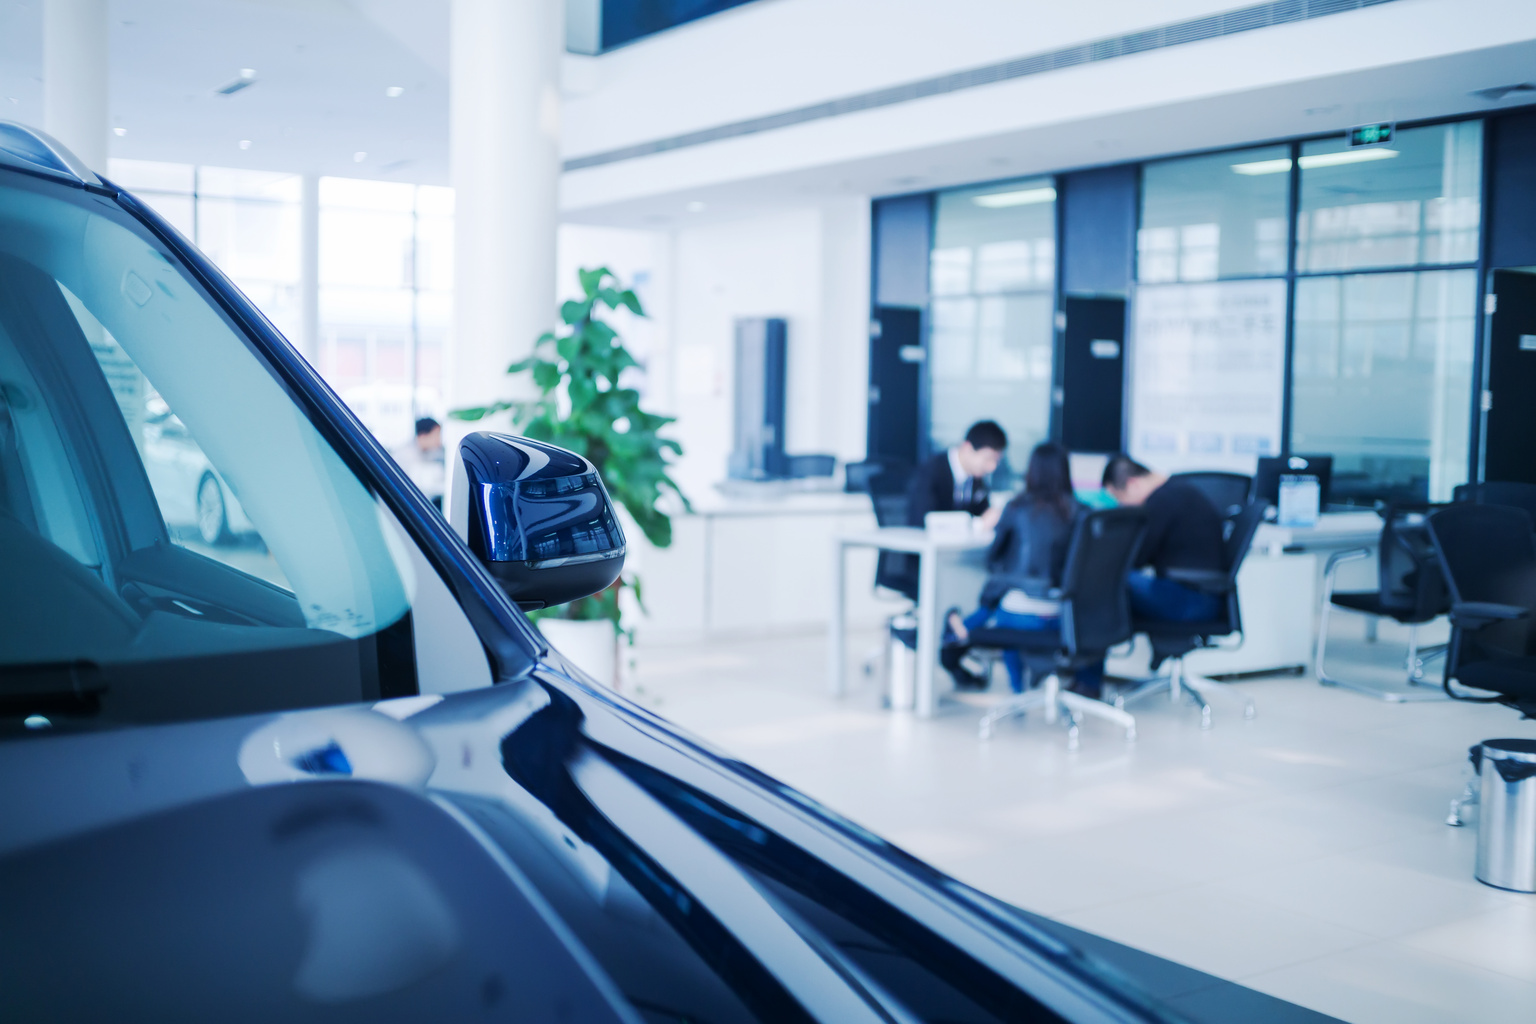 Wolters Kluwer auto lending insights suggest busy year for U.S. auto lenders